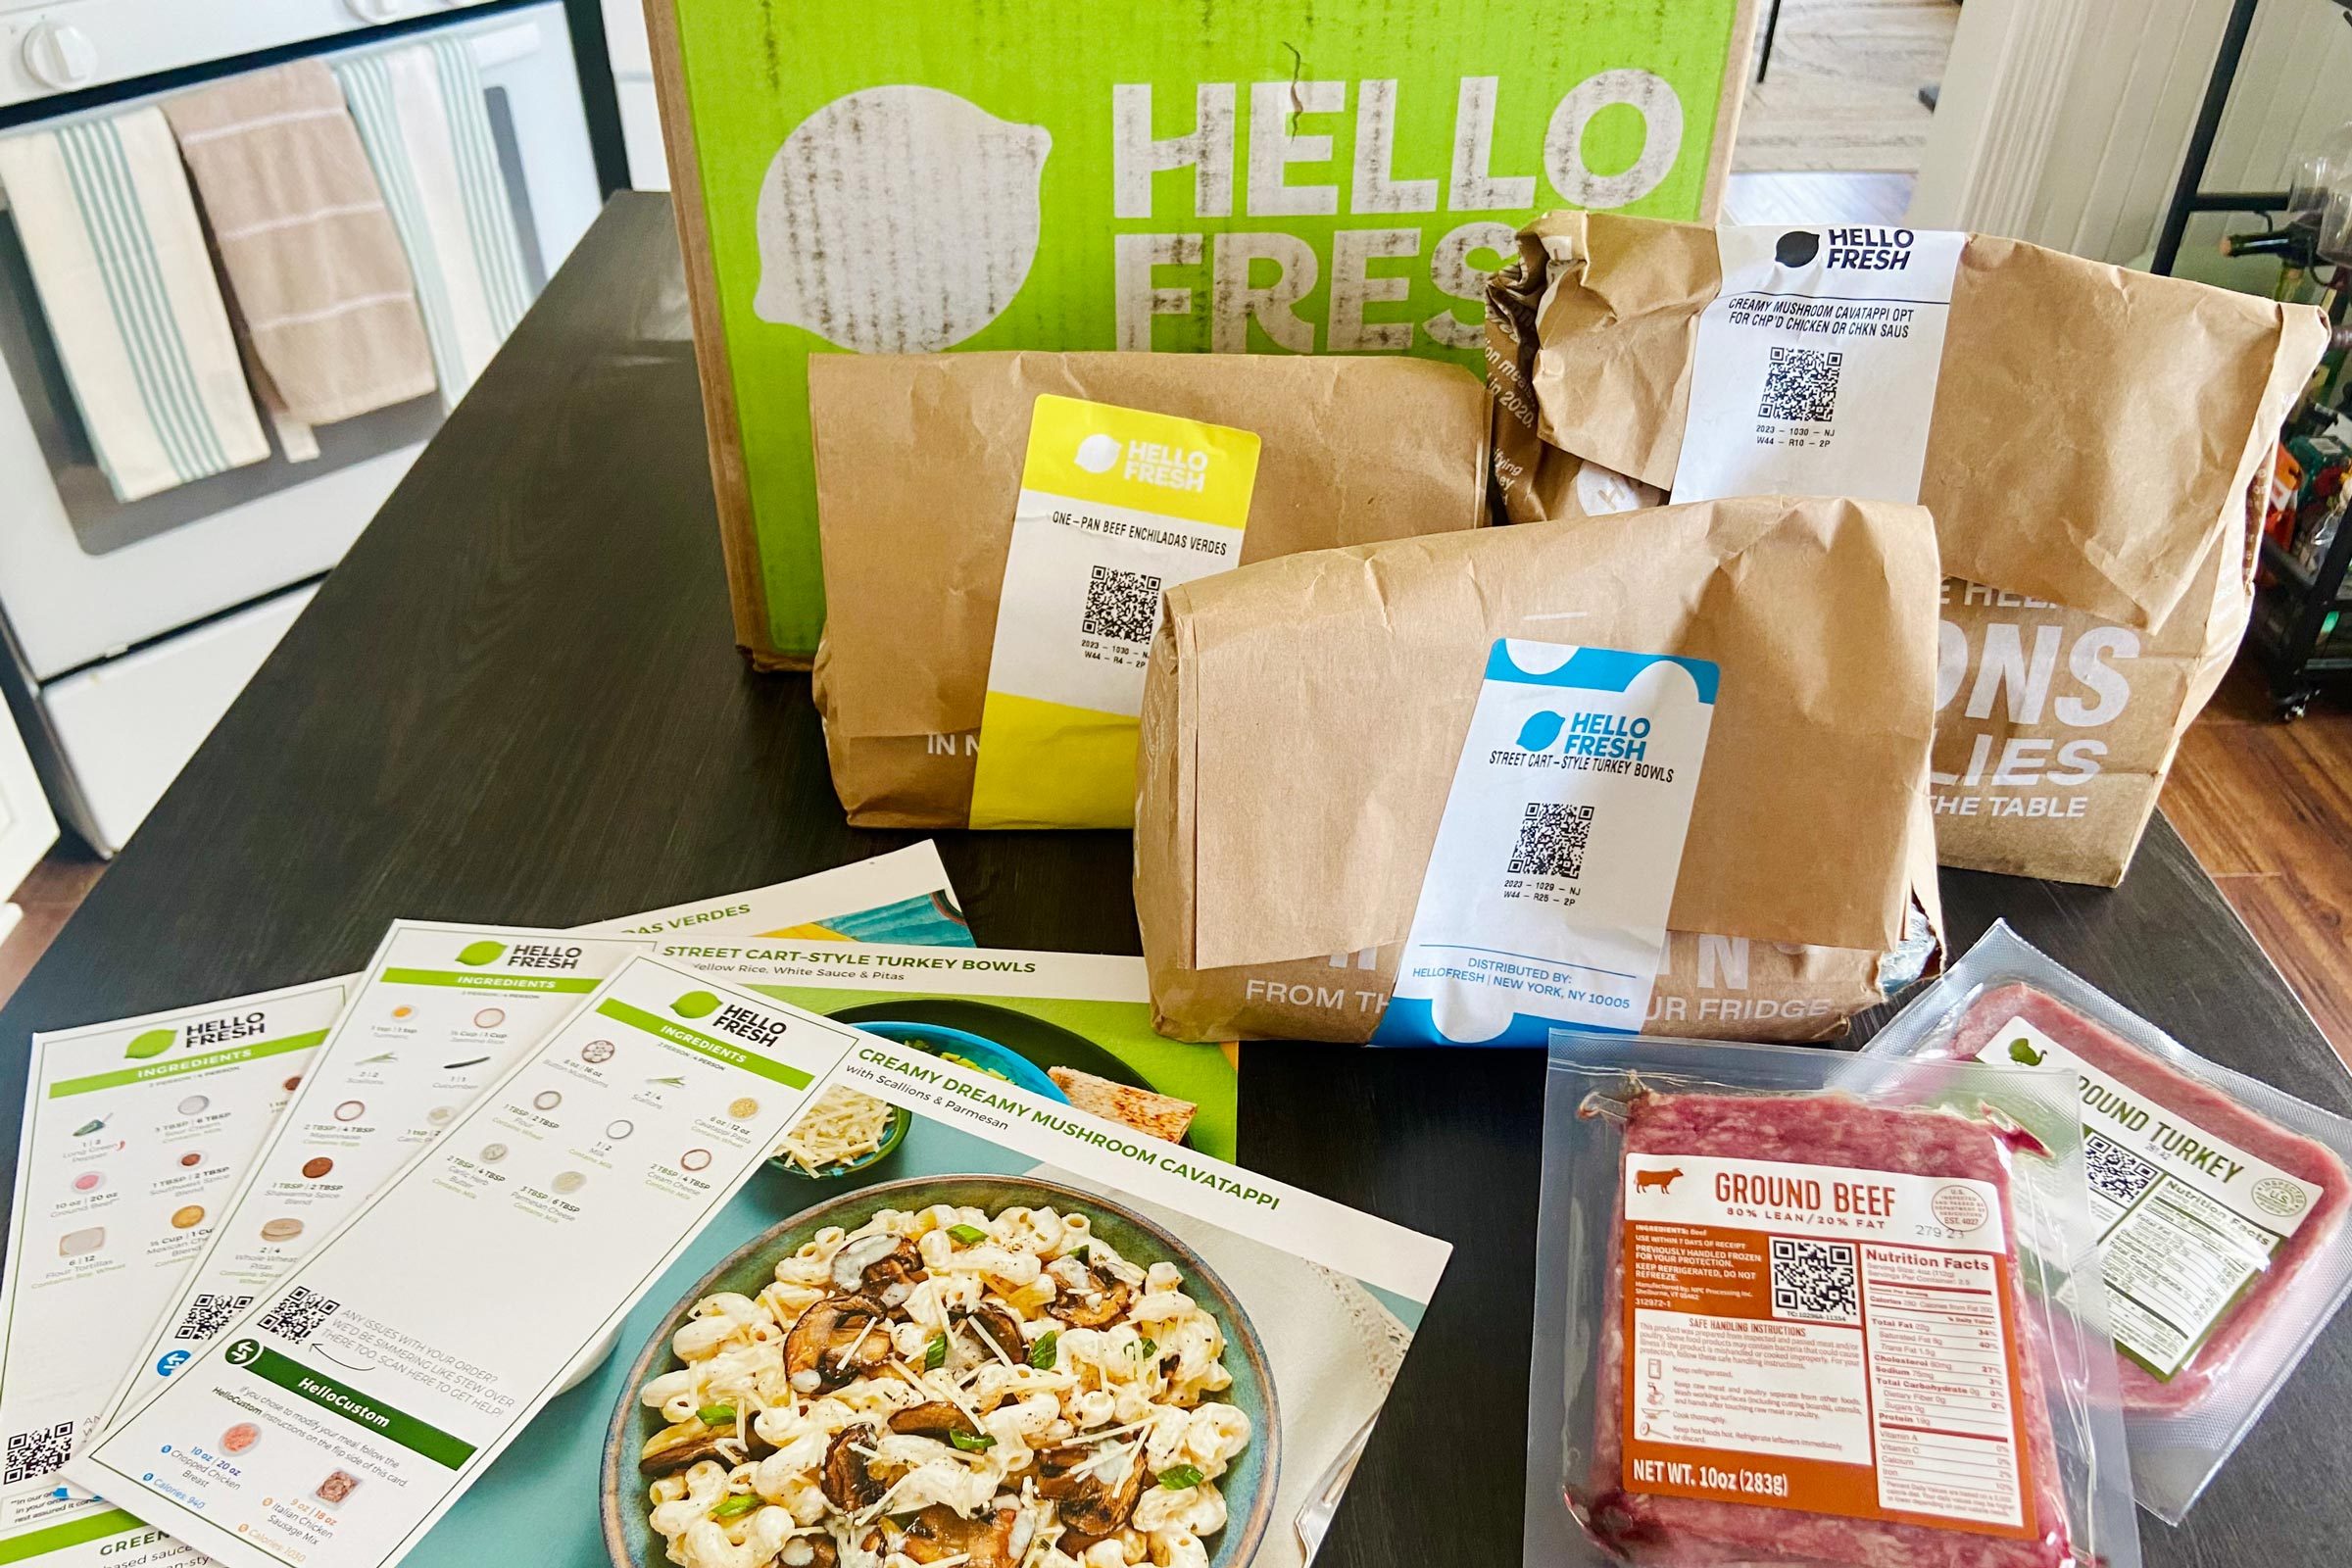 Meal Kits Find a New Home in Grocery Stores - Eater